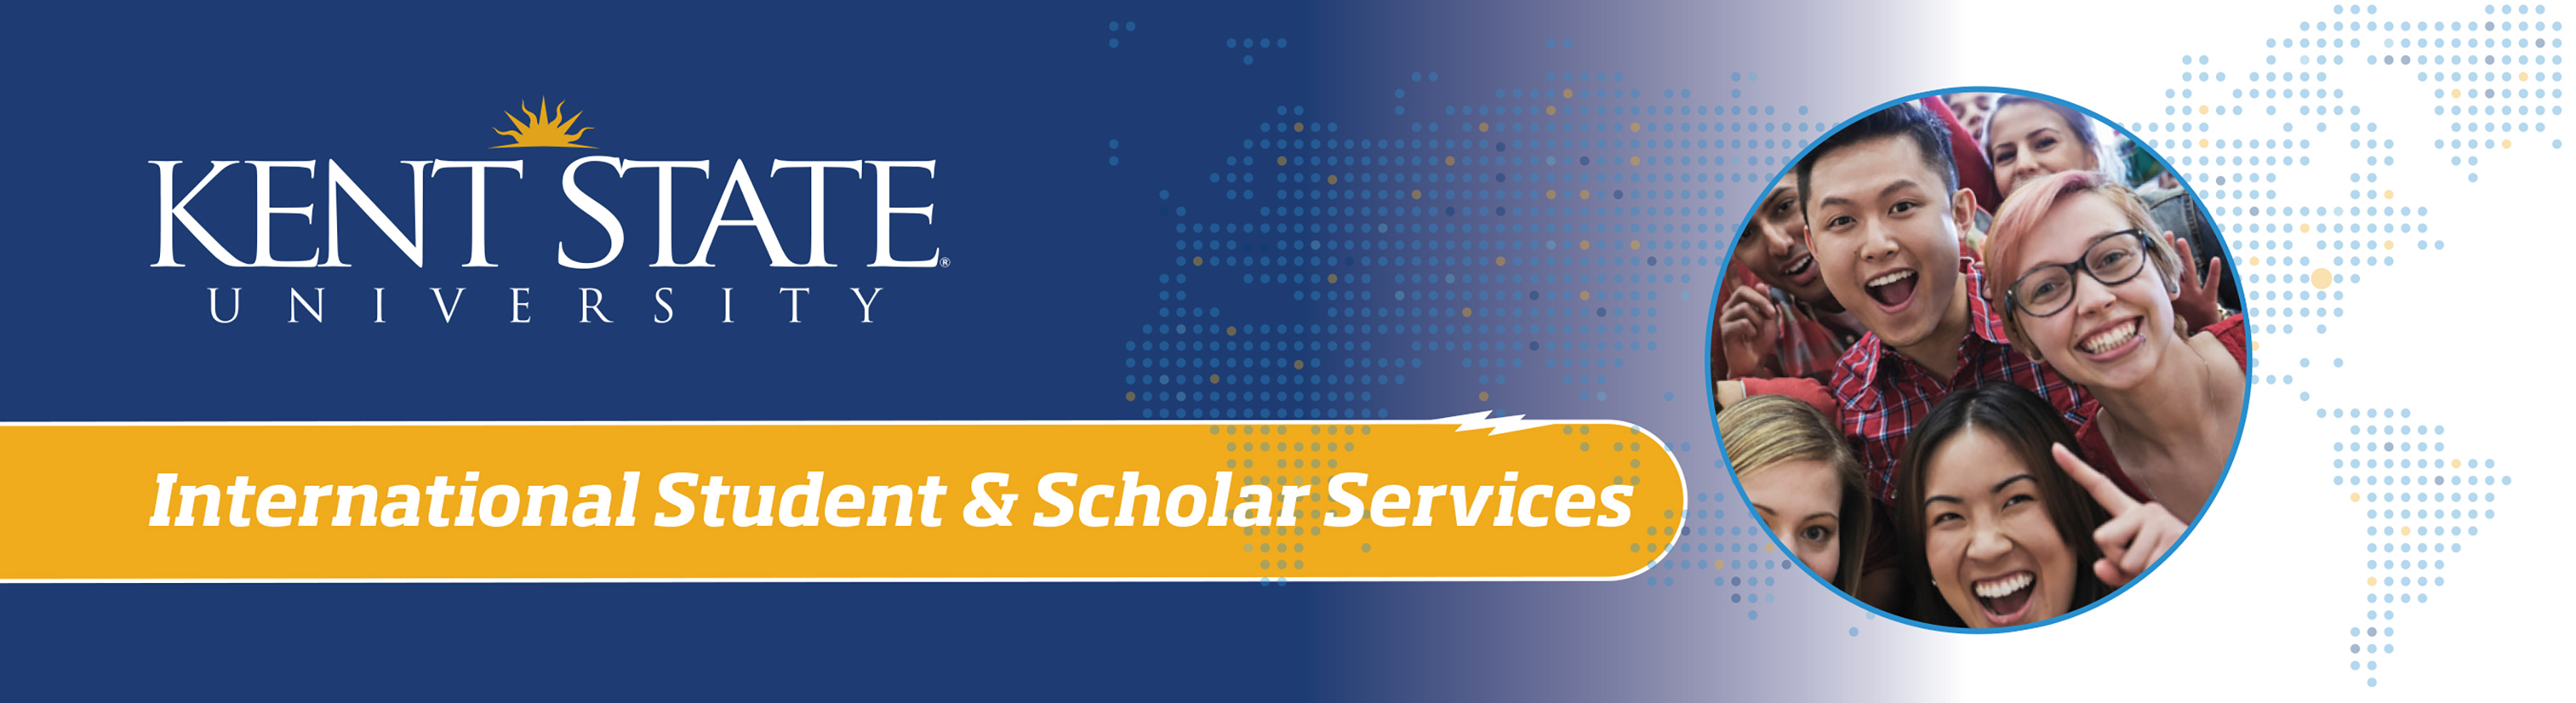 International Student and Scholar Services - Kent State University